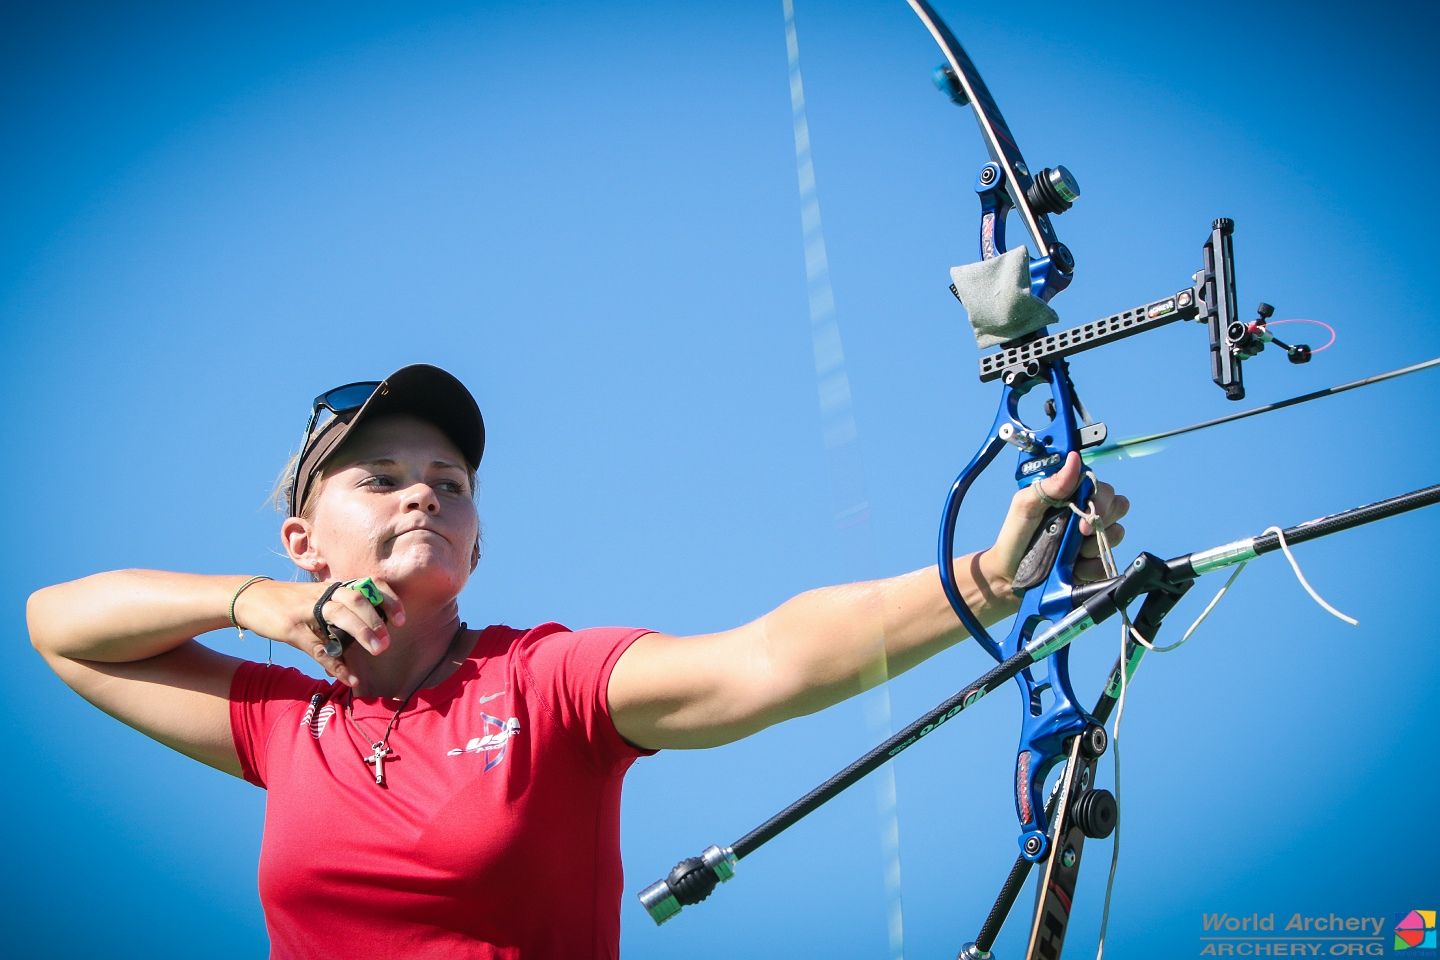 USA Archery Begins Search for Women’s Head Coach After Restructuring of Staff